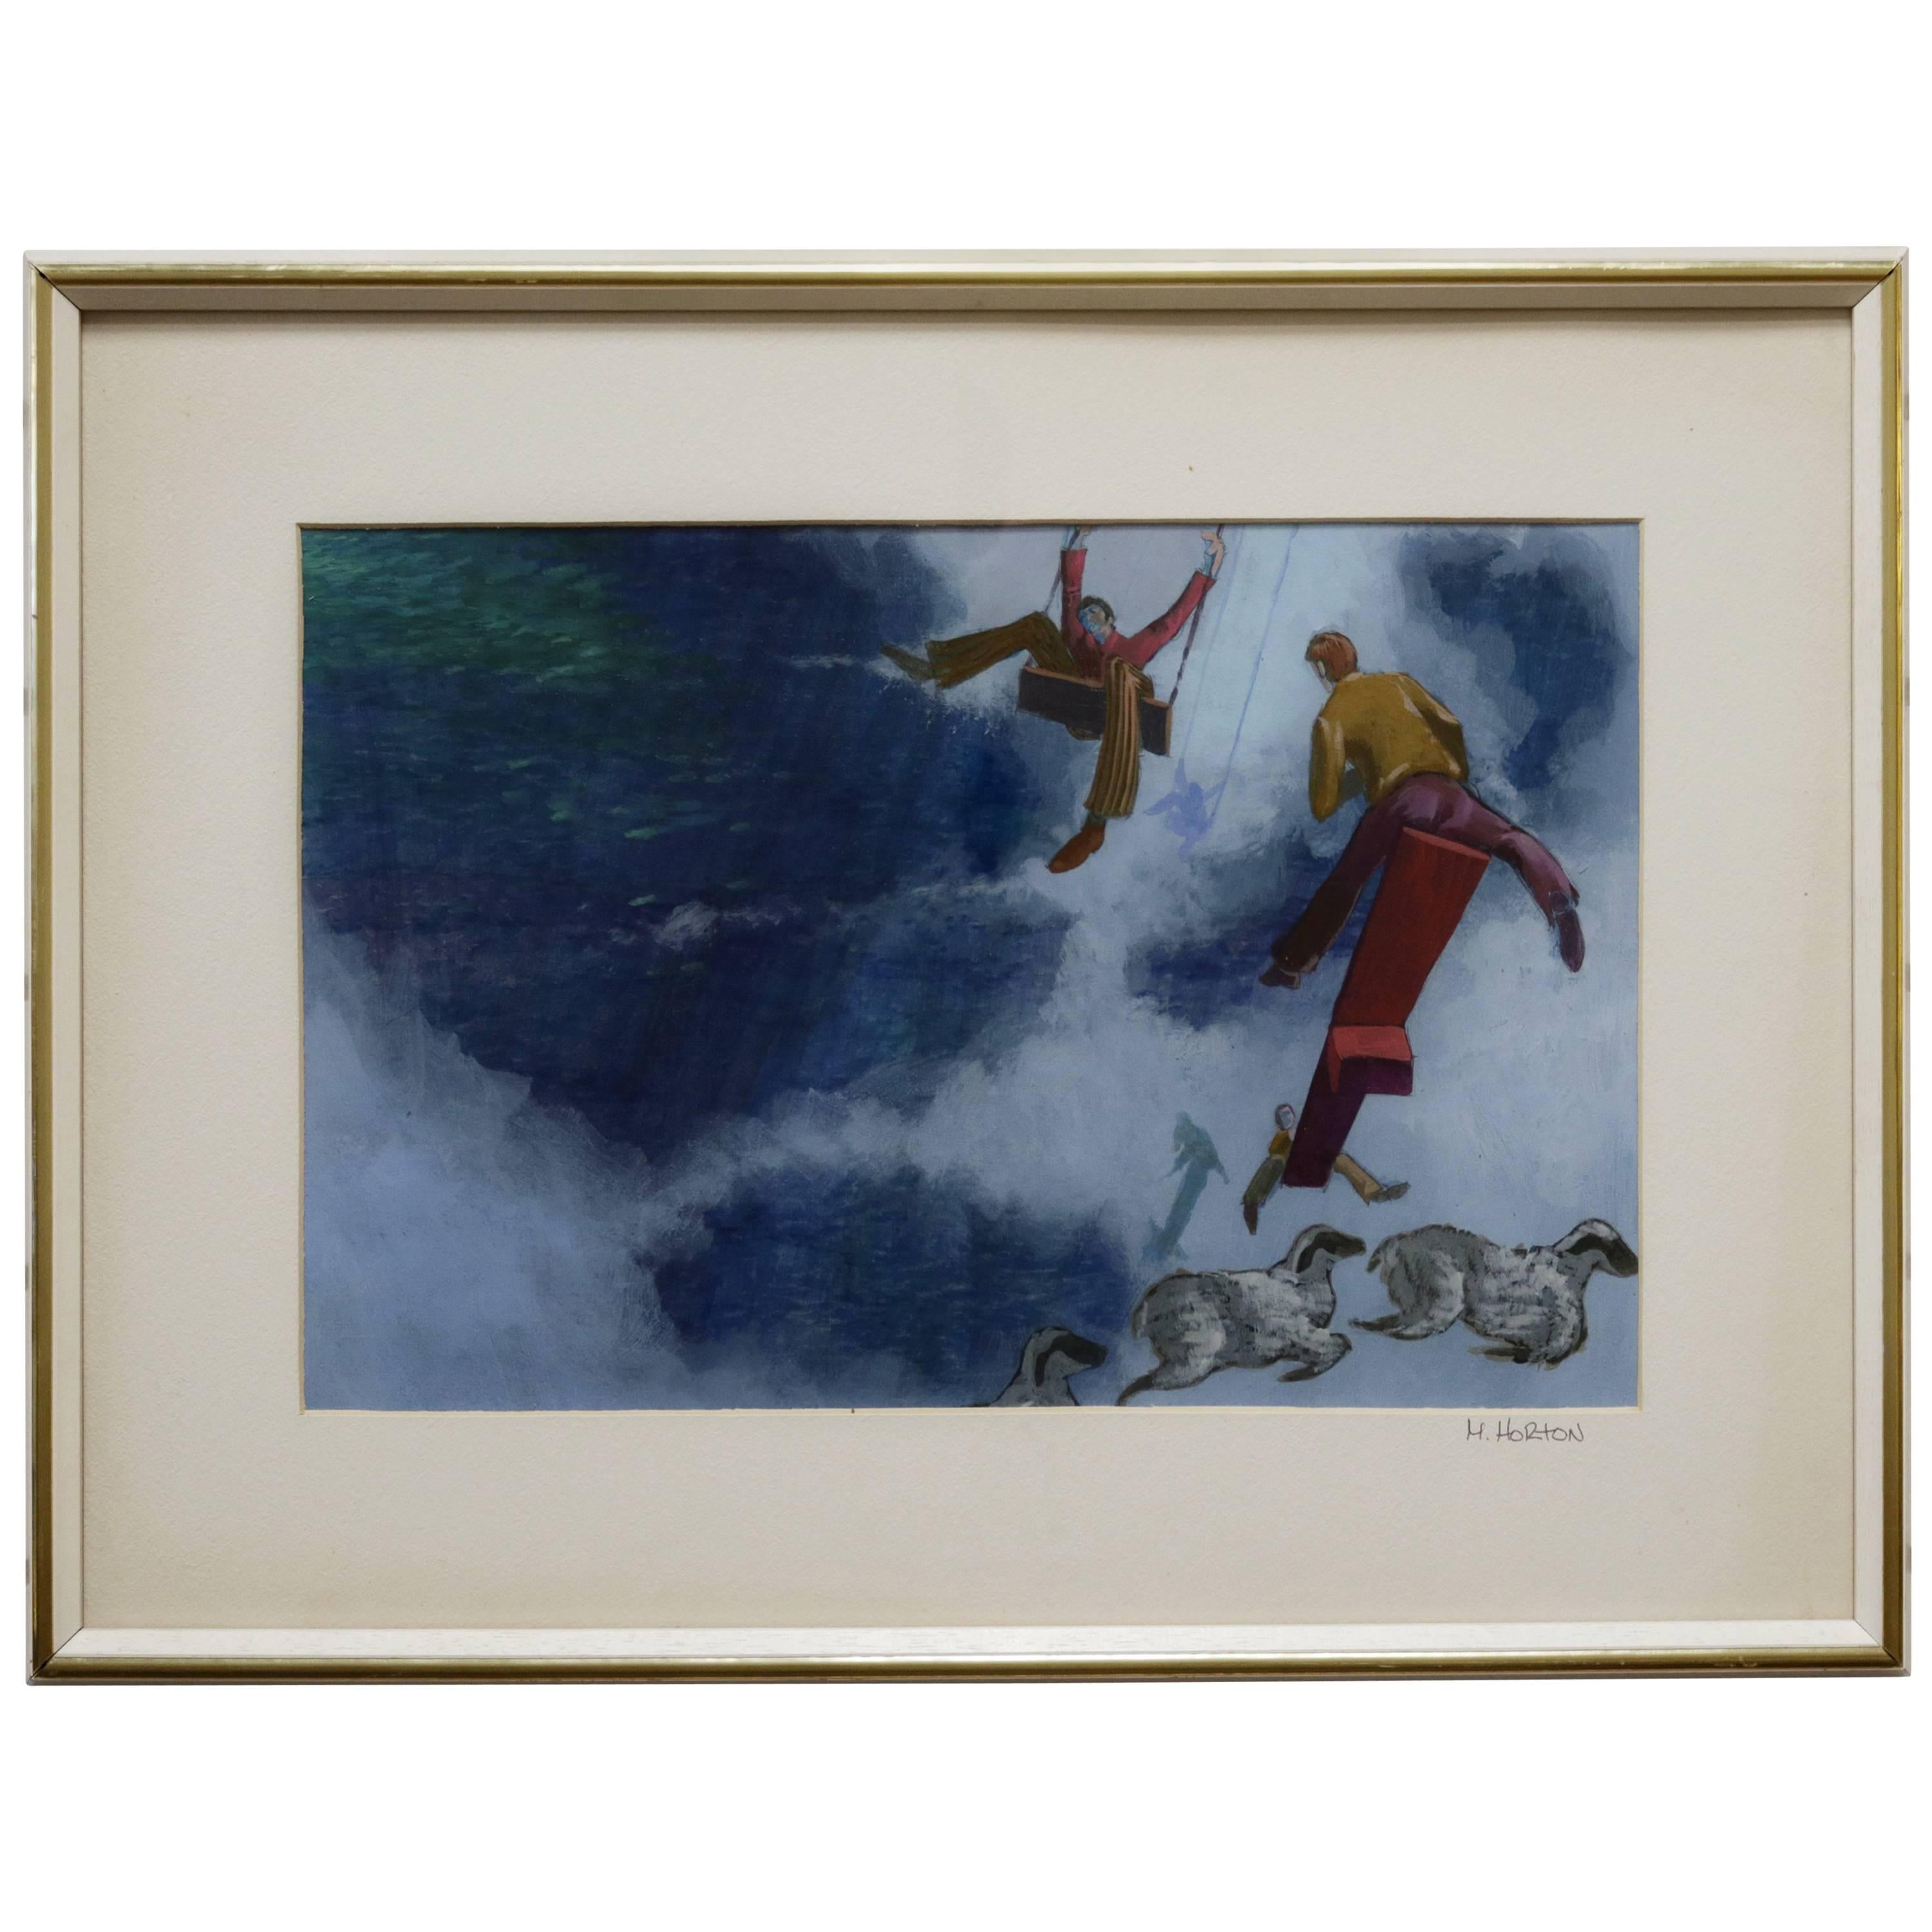 Playful Framed Gouache Painting by M. Horton